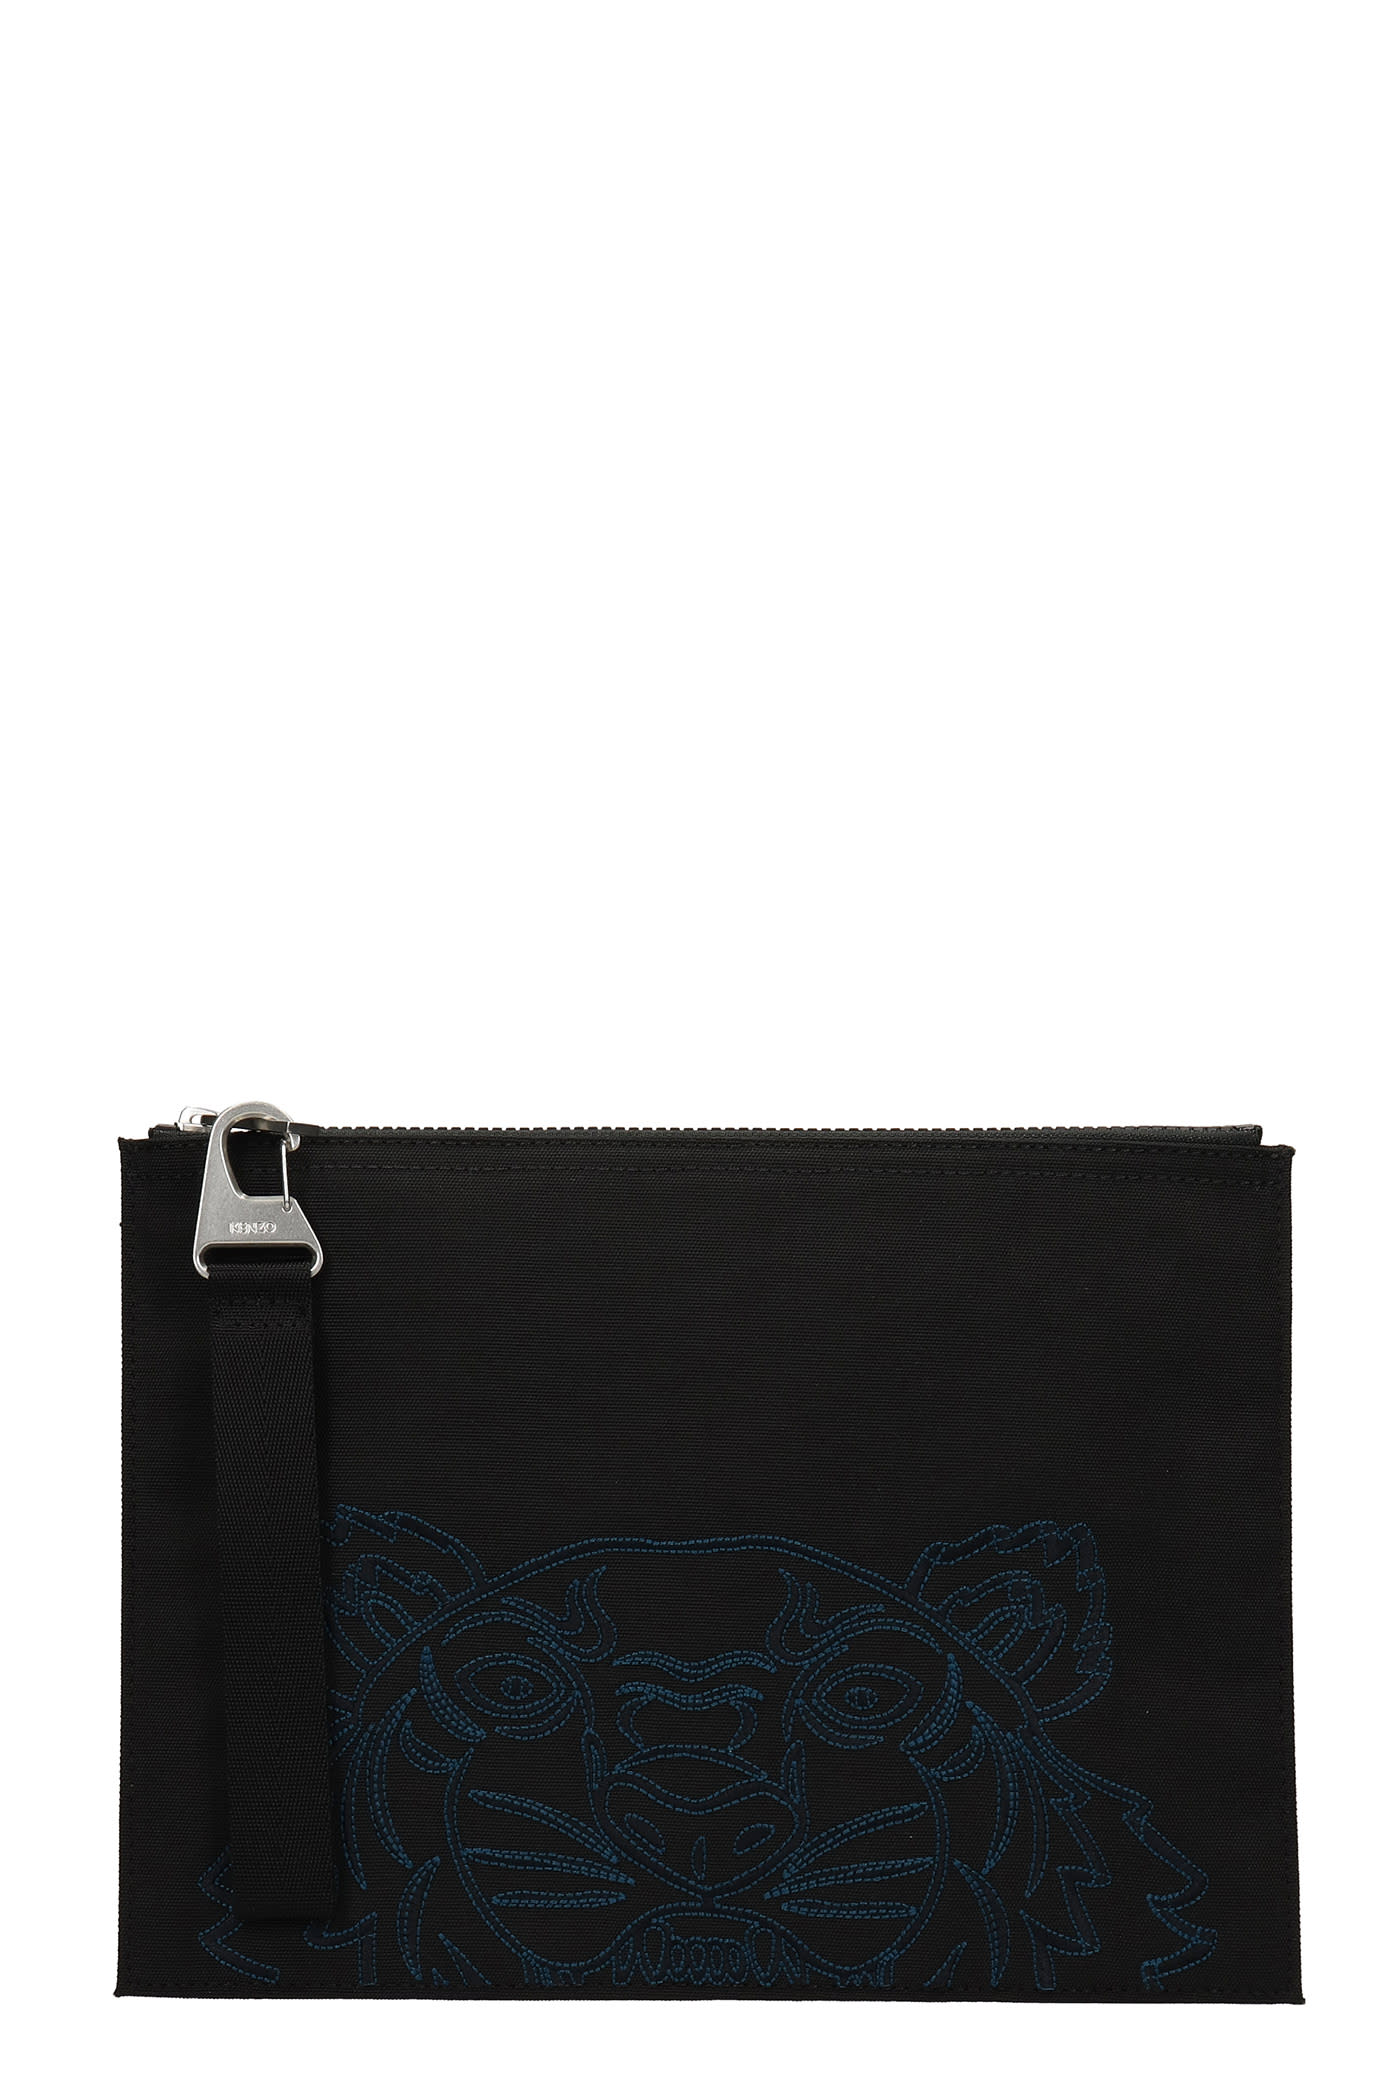 Kenzo Clutch In Black Polyester